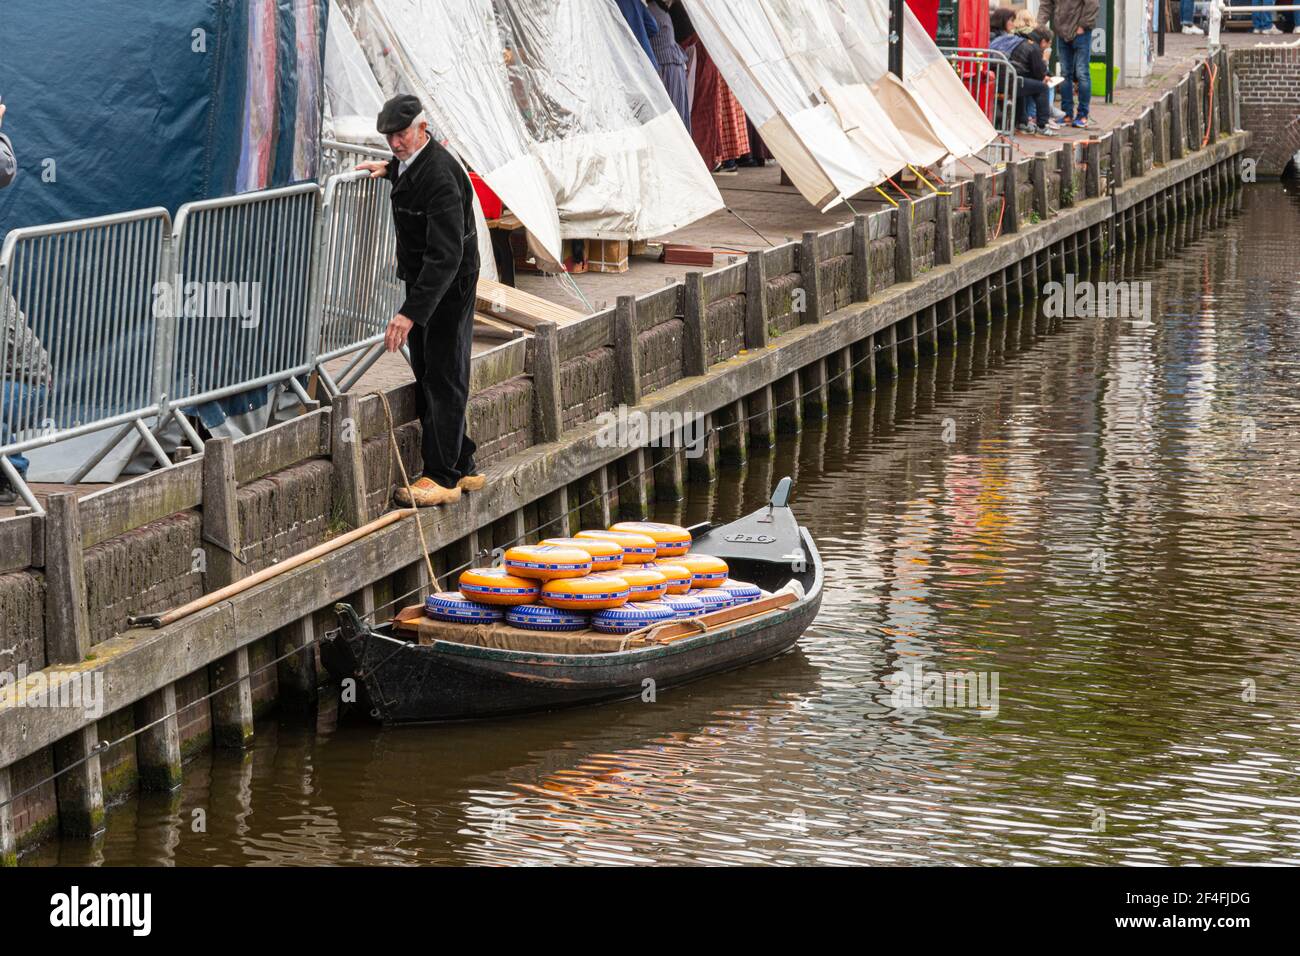 Alkmaar, Netherlands; May 18, 2018: Cheese Market a barge arrives with merchandise Stock Photo